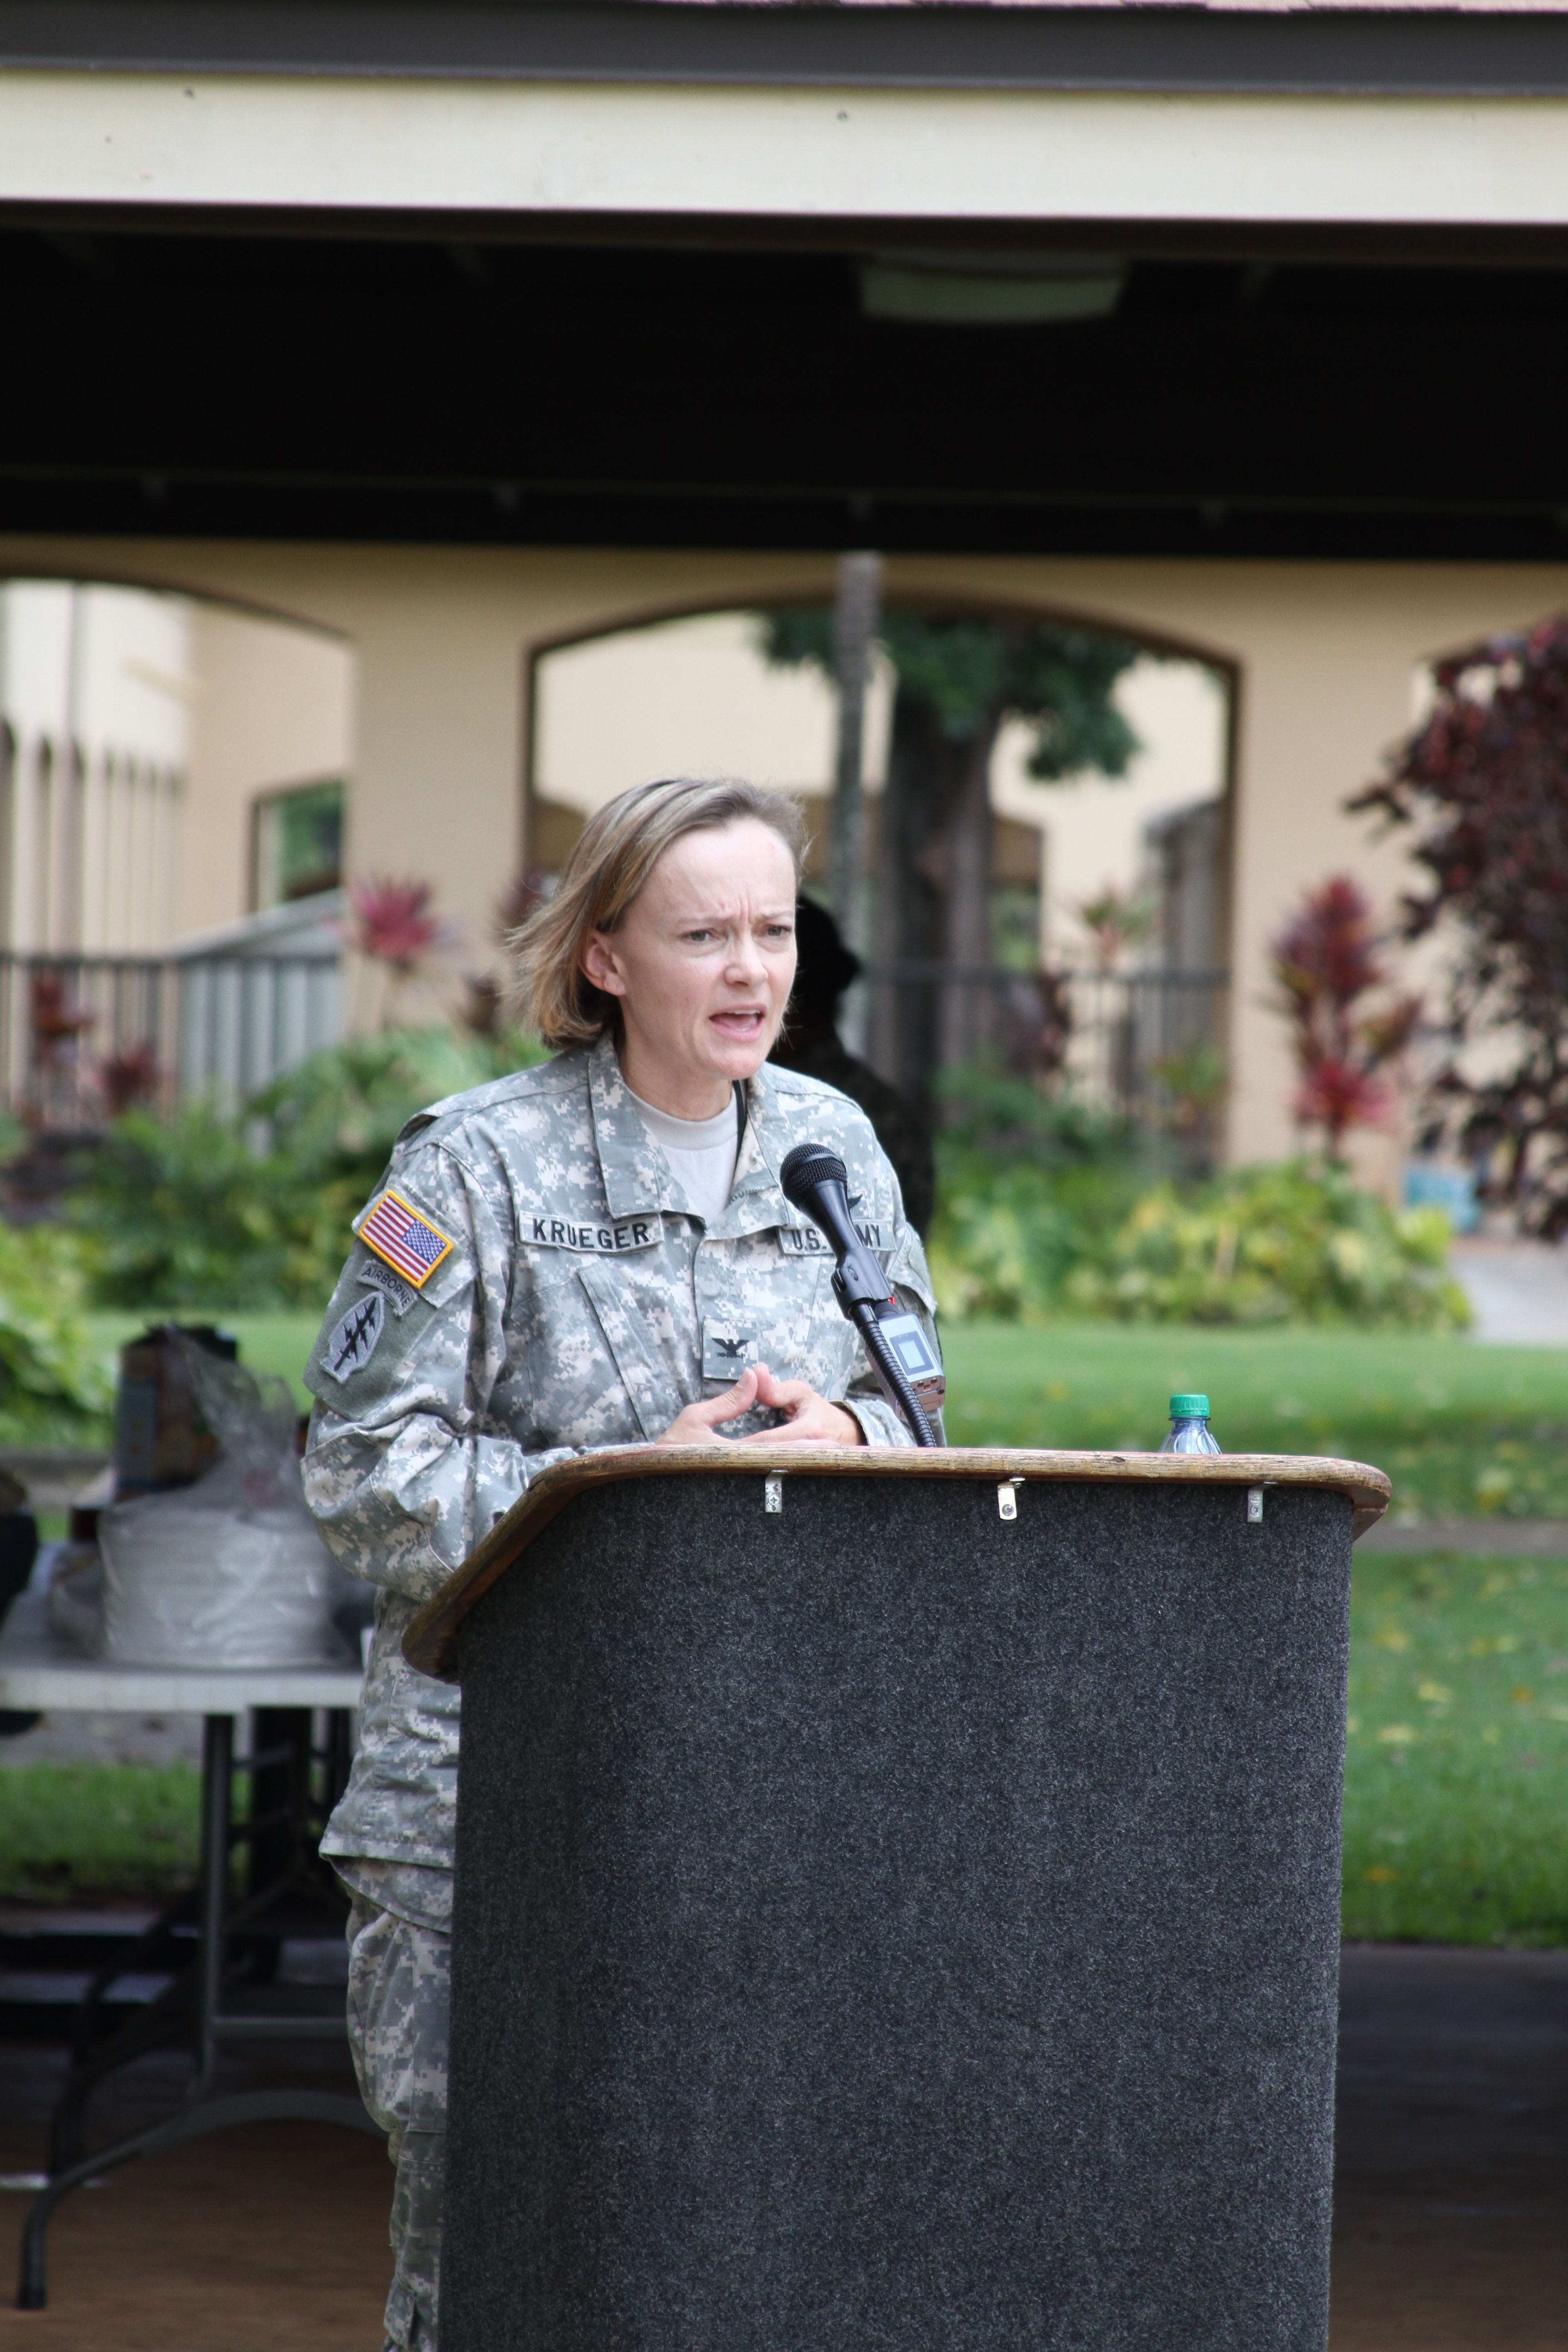 Usahc Sb Celebrates Womens Equality Article The United States Army